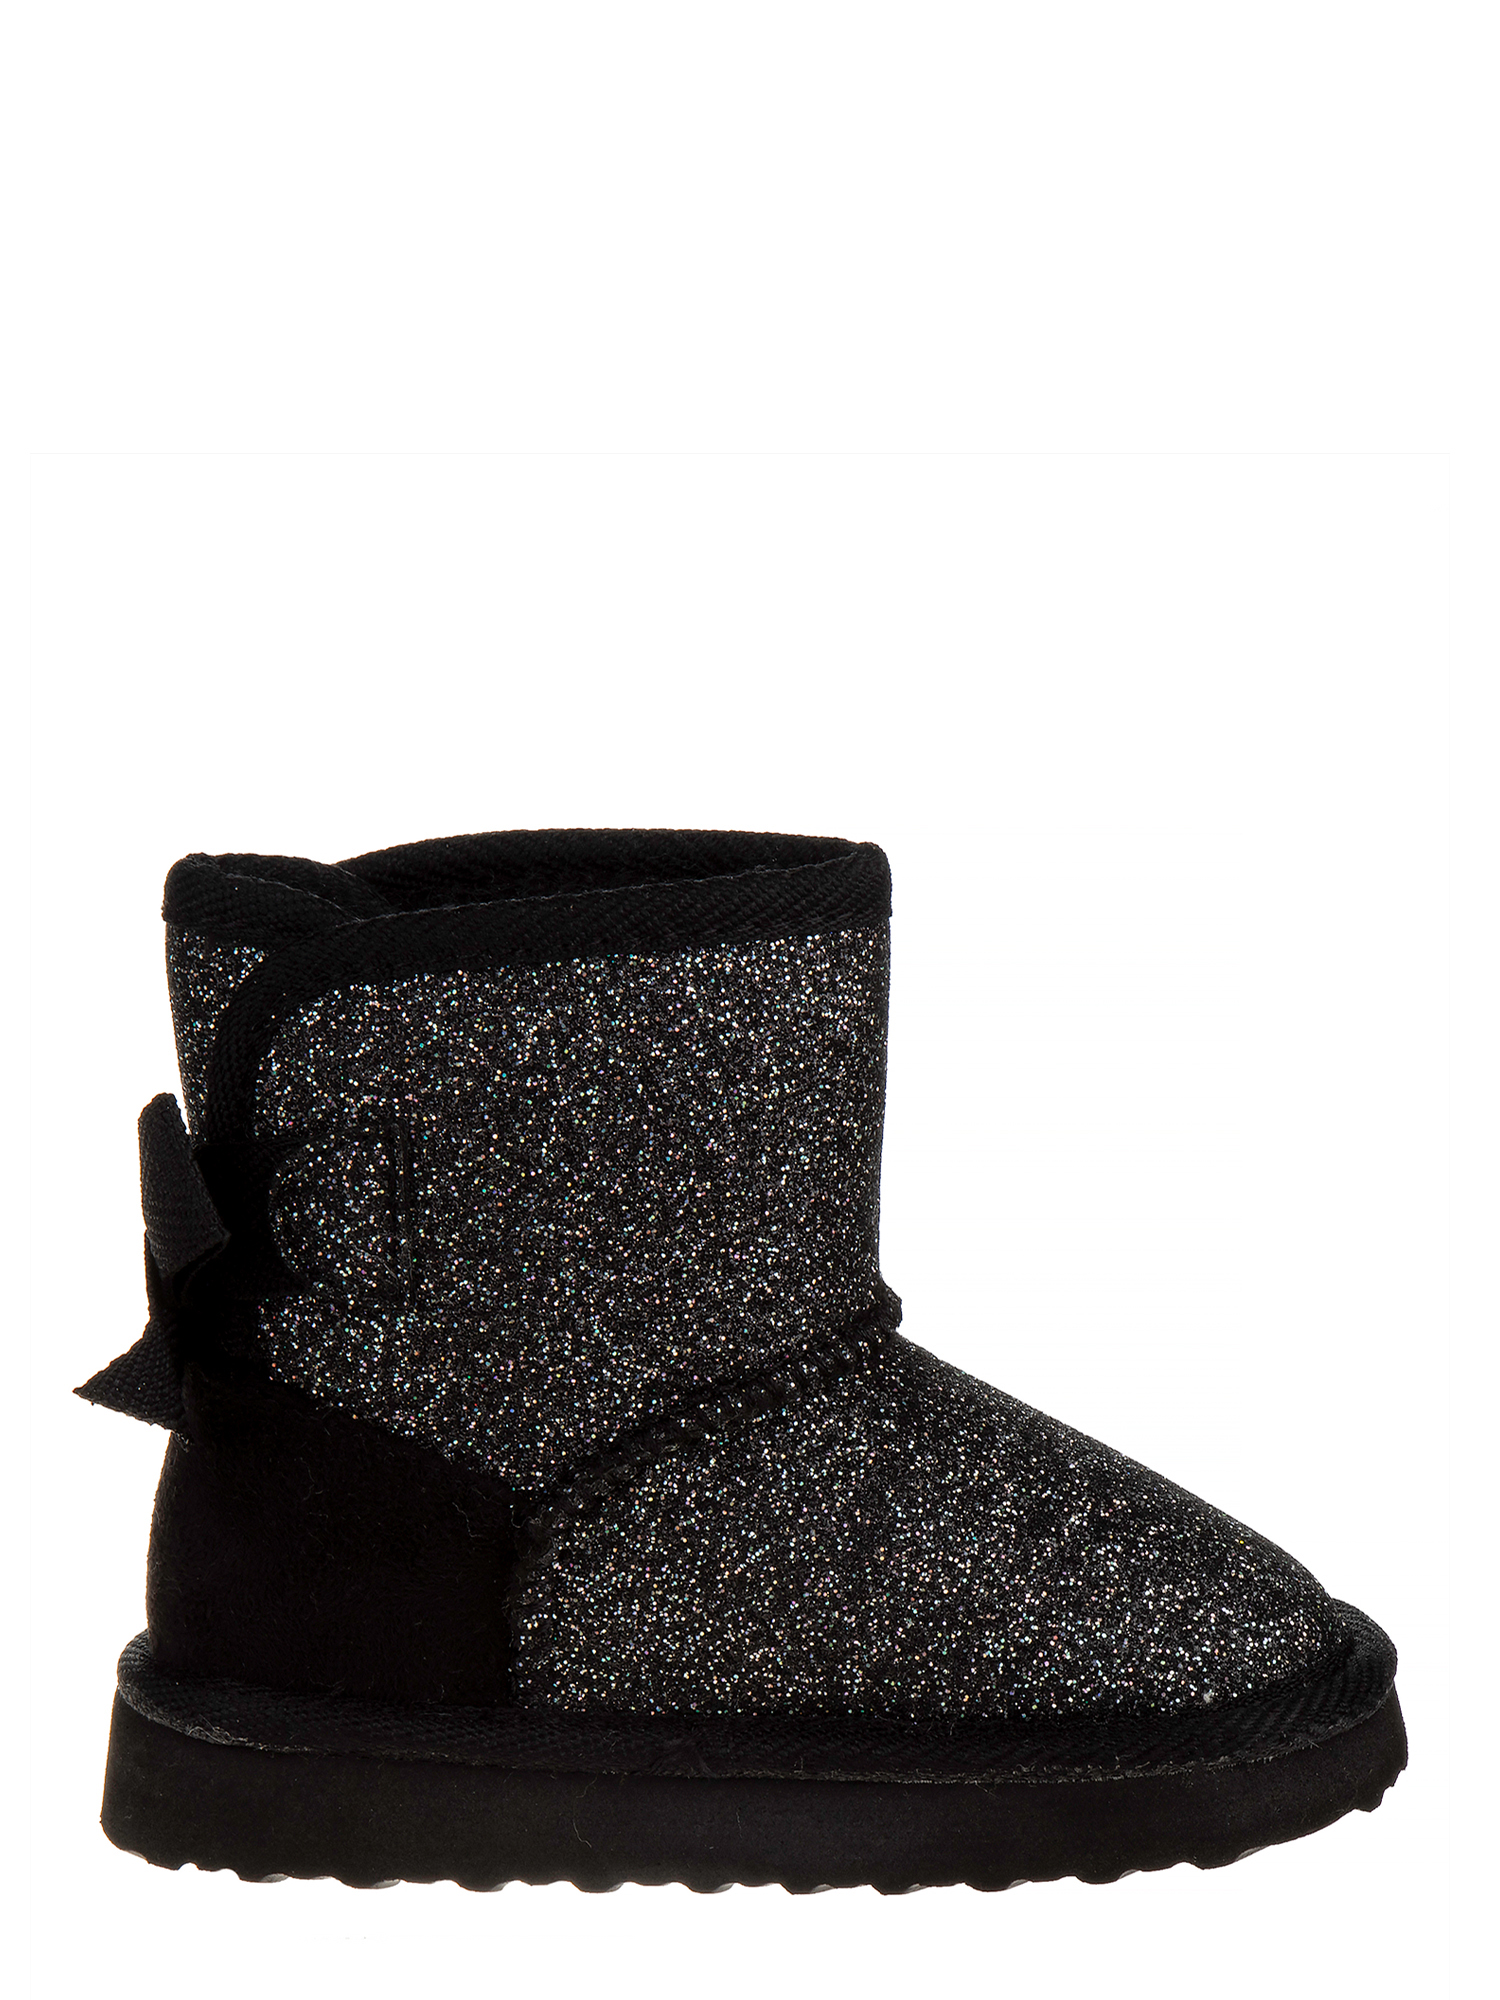 Josmo Glitter & Bows Faux Shearling Ankle Boot (Toddler Girls) - image 3 of 5